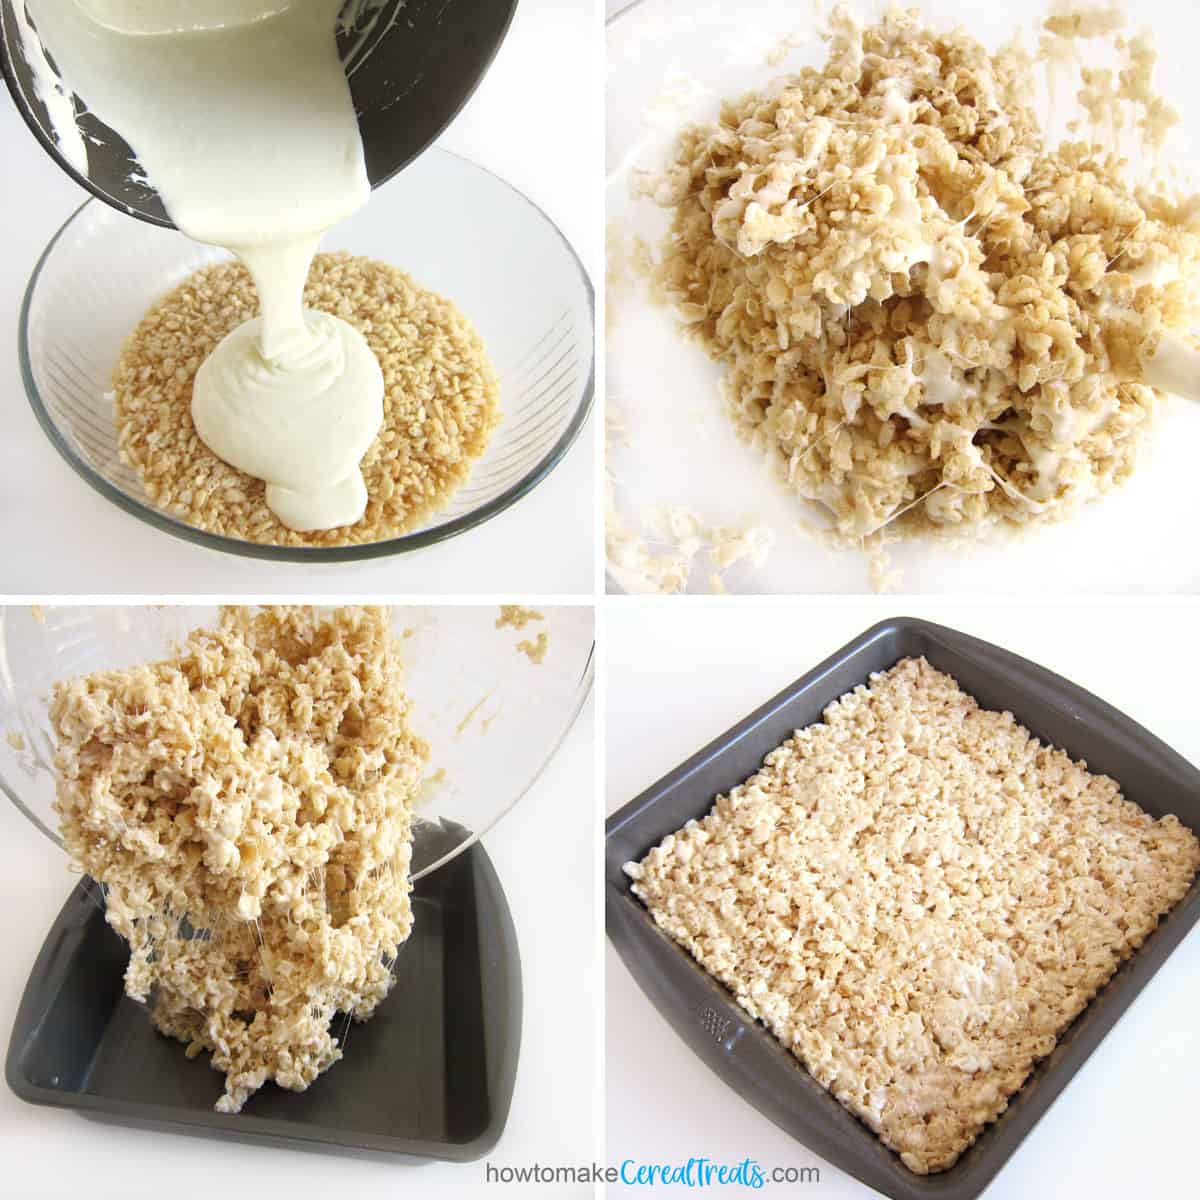 pour melted butter and marshmallows over crisp rice cereal, stir, then spread into an 8-inch pan